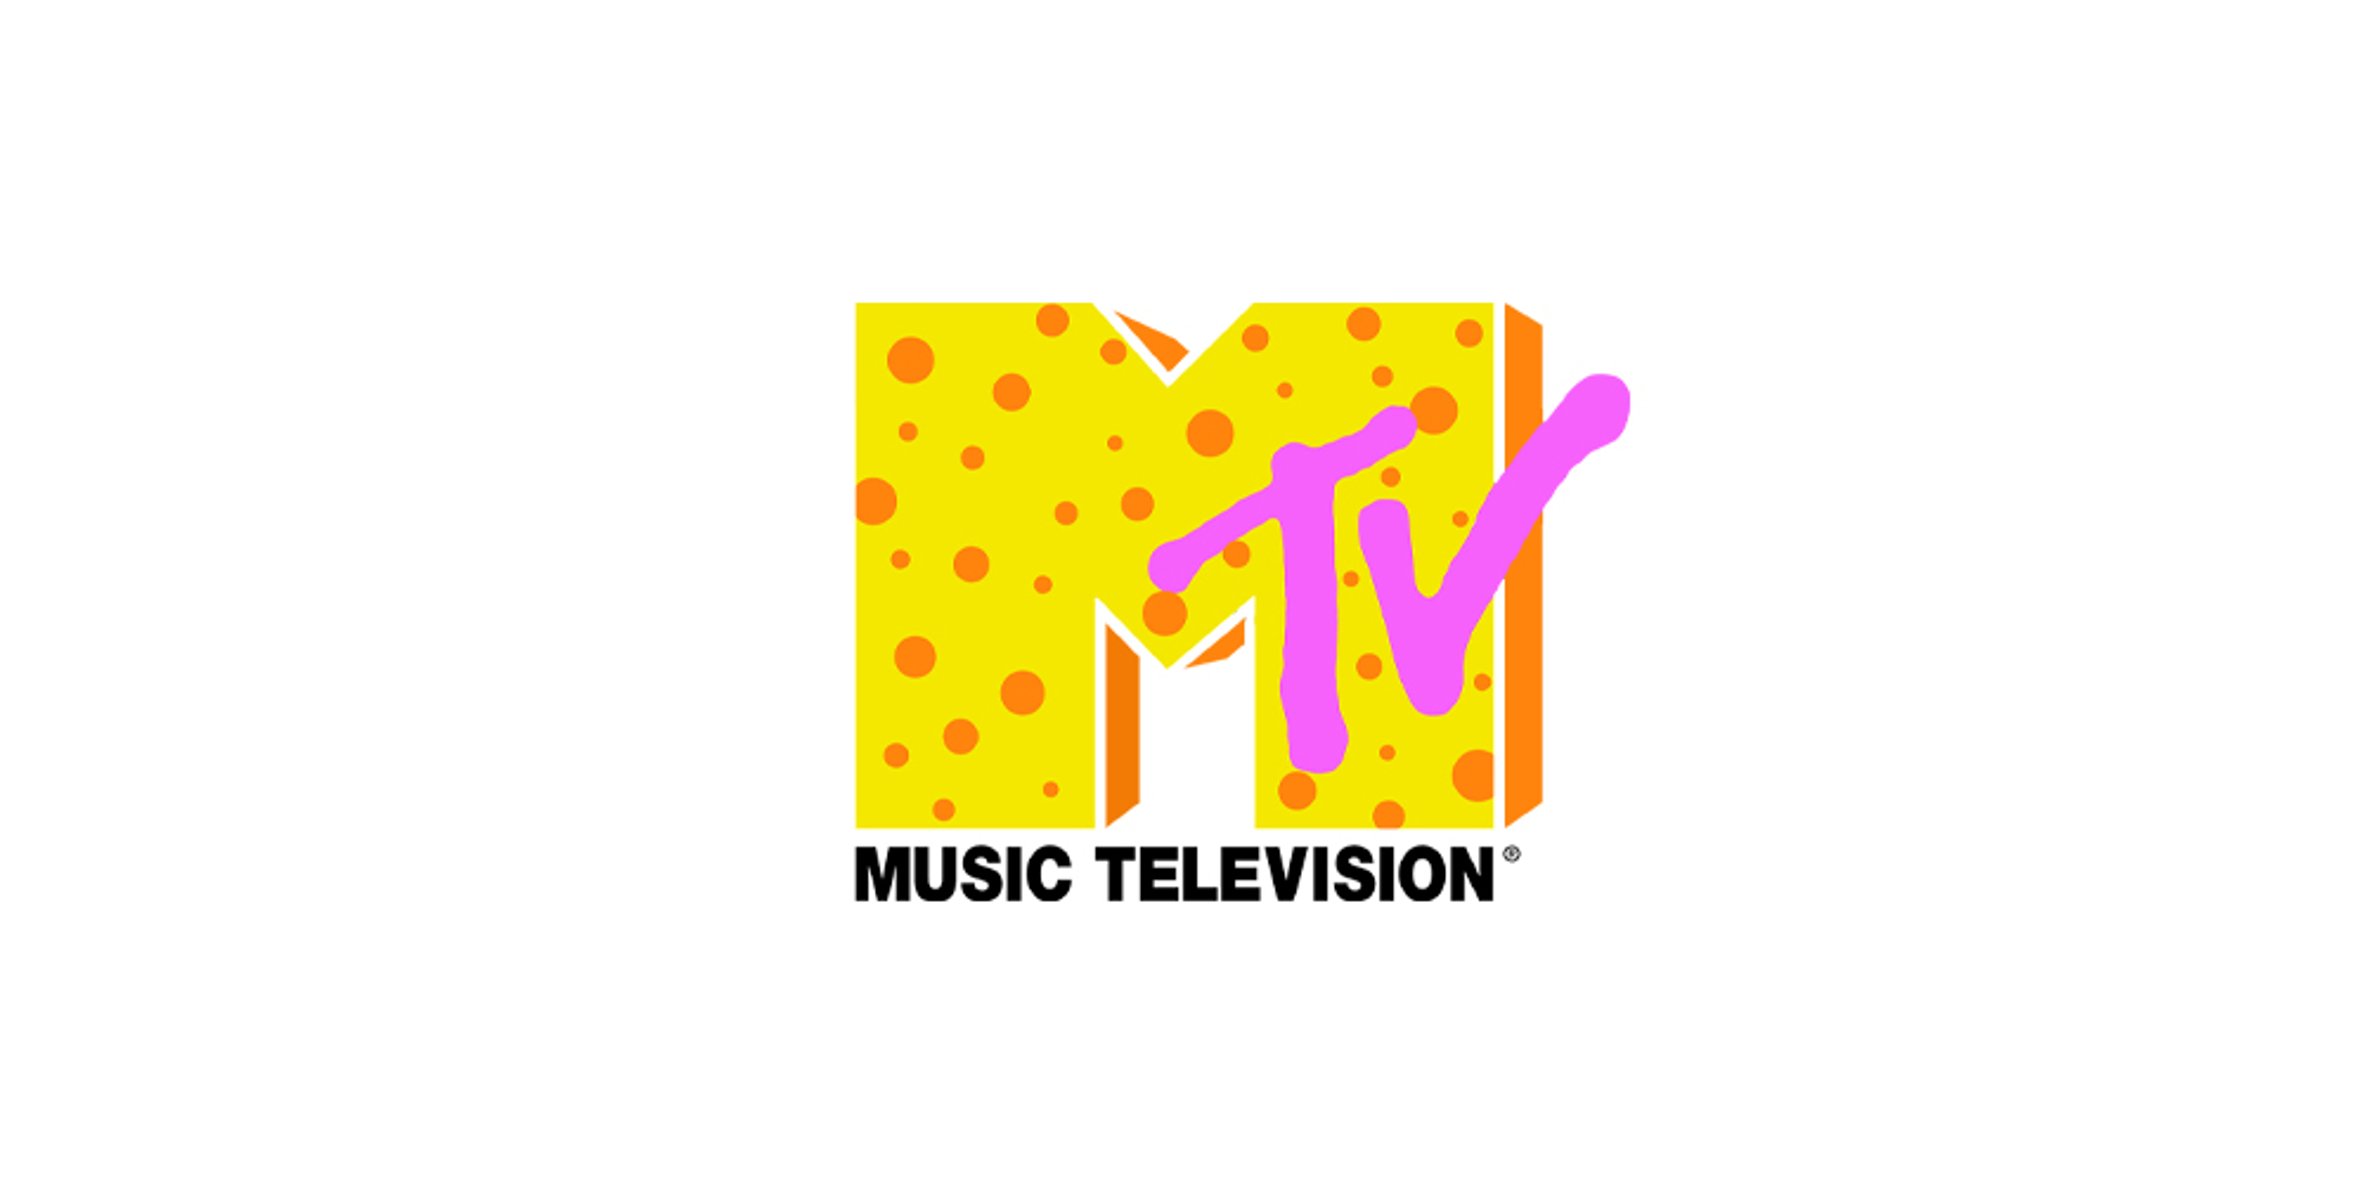 MTV is looking for their next big topic to tackle